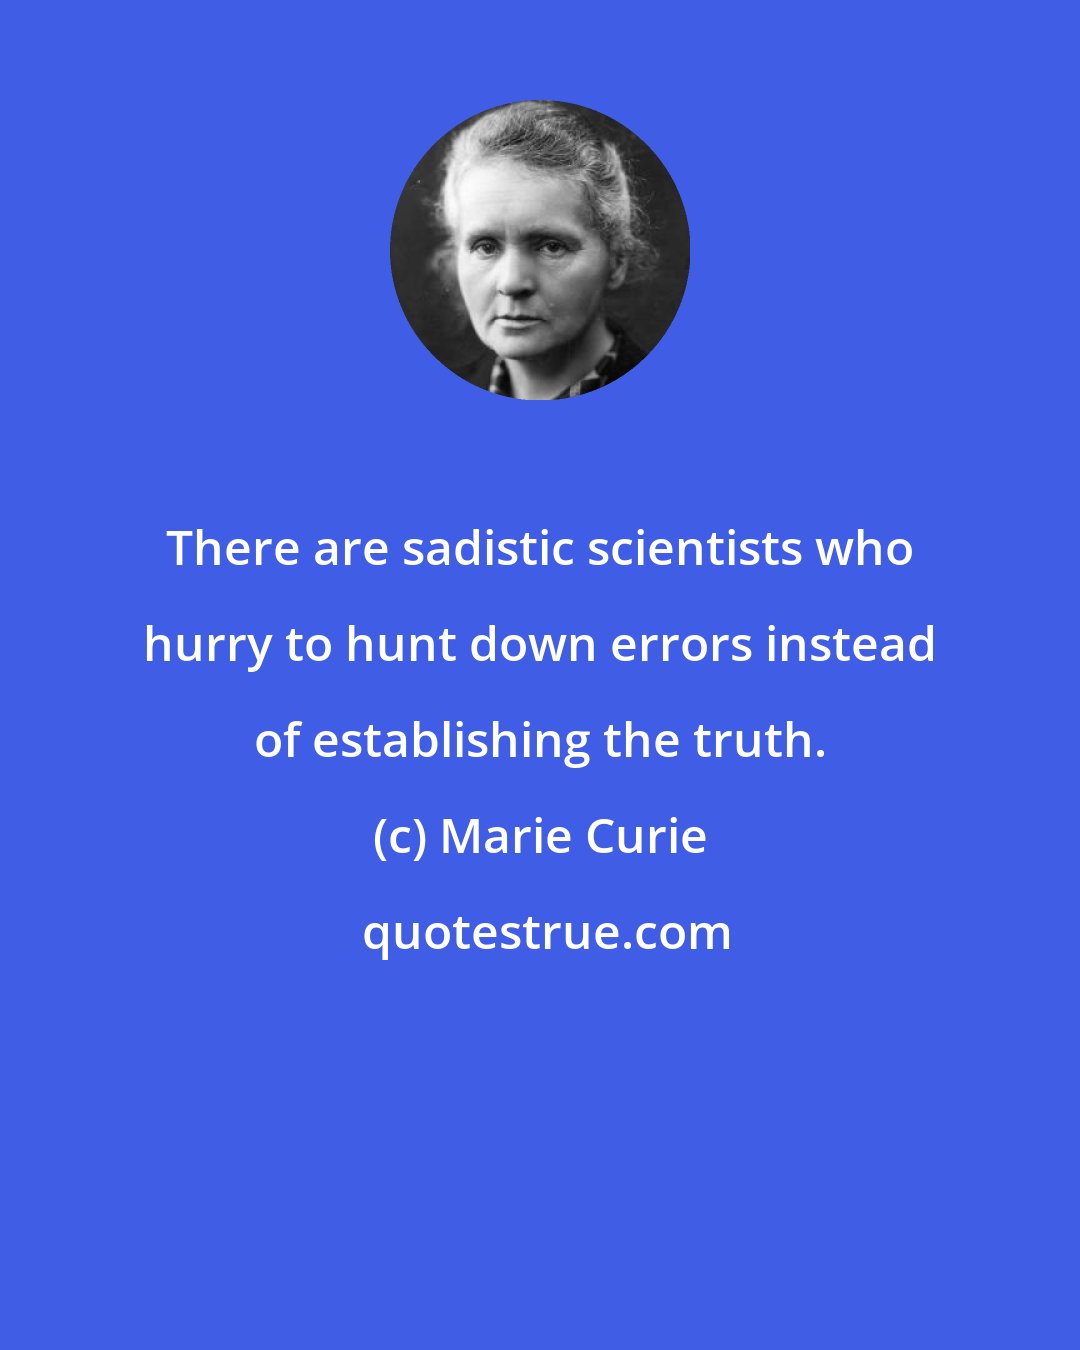 Marie Curie: There are sadistic scientists who hurry to hunt down errors instead of establishing the truth.